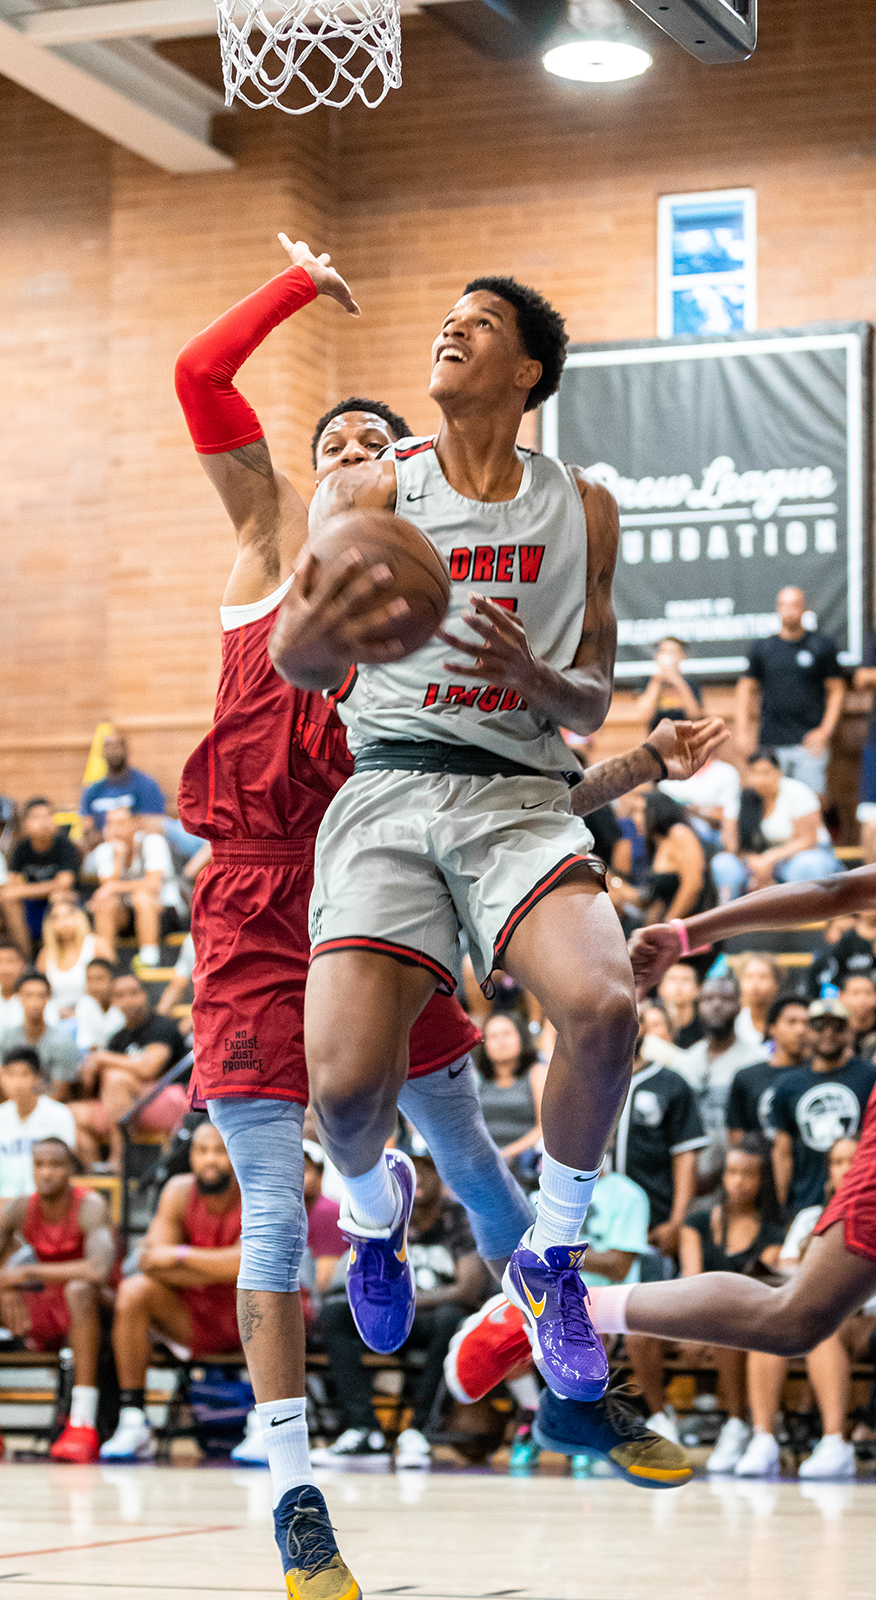 UCLA basketball players hone skills in competitive Drew League matchups